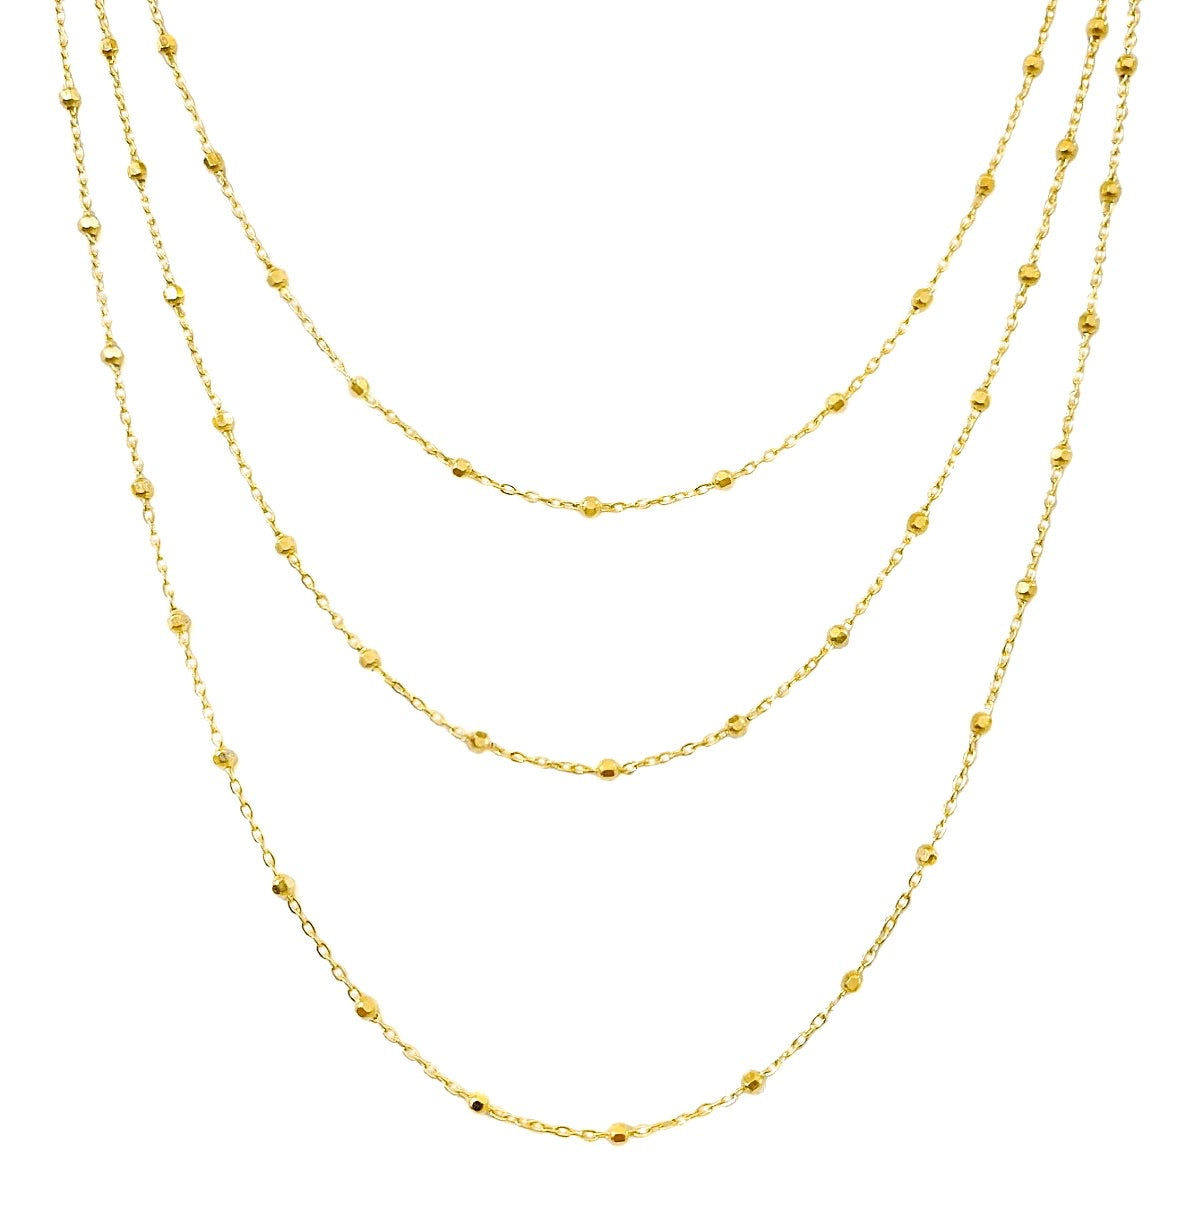 14K YELLOW GOLD TRIPLE LAYERED BEADED NECKLACE